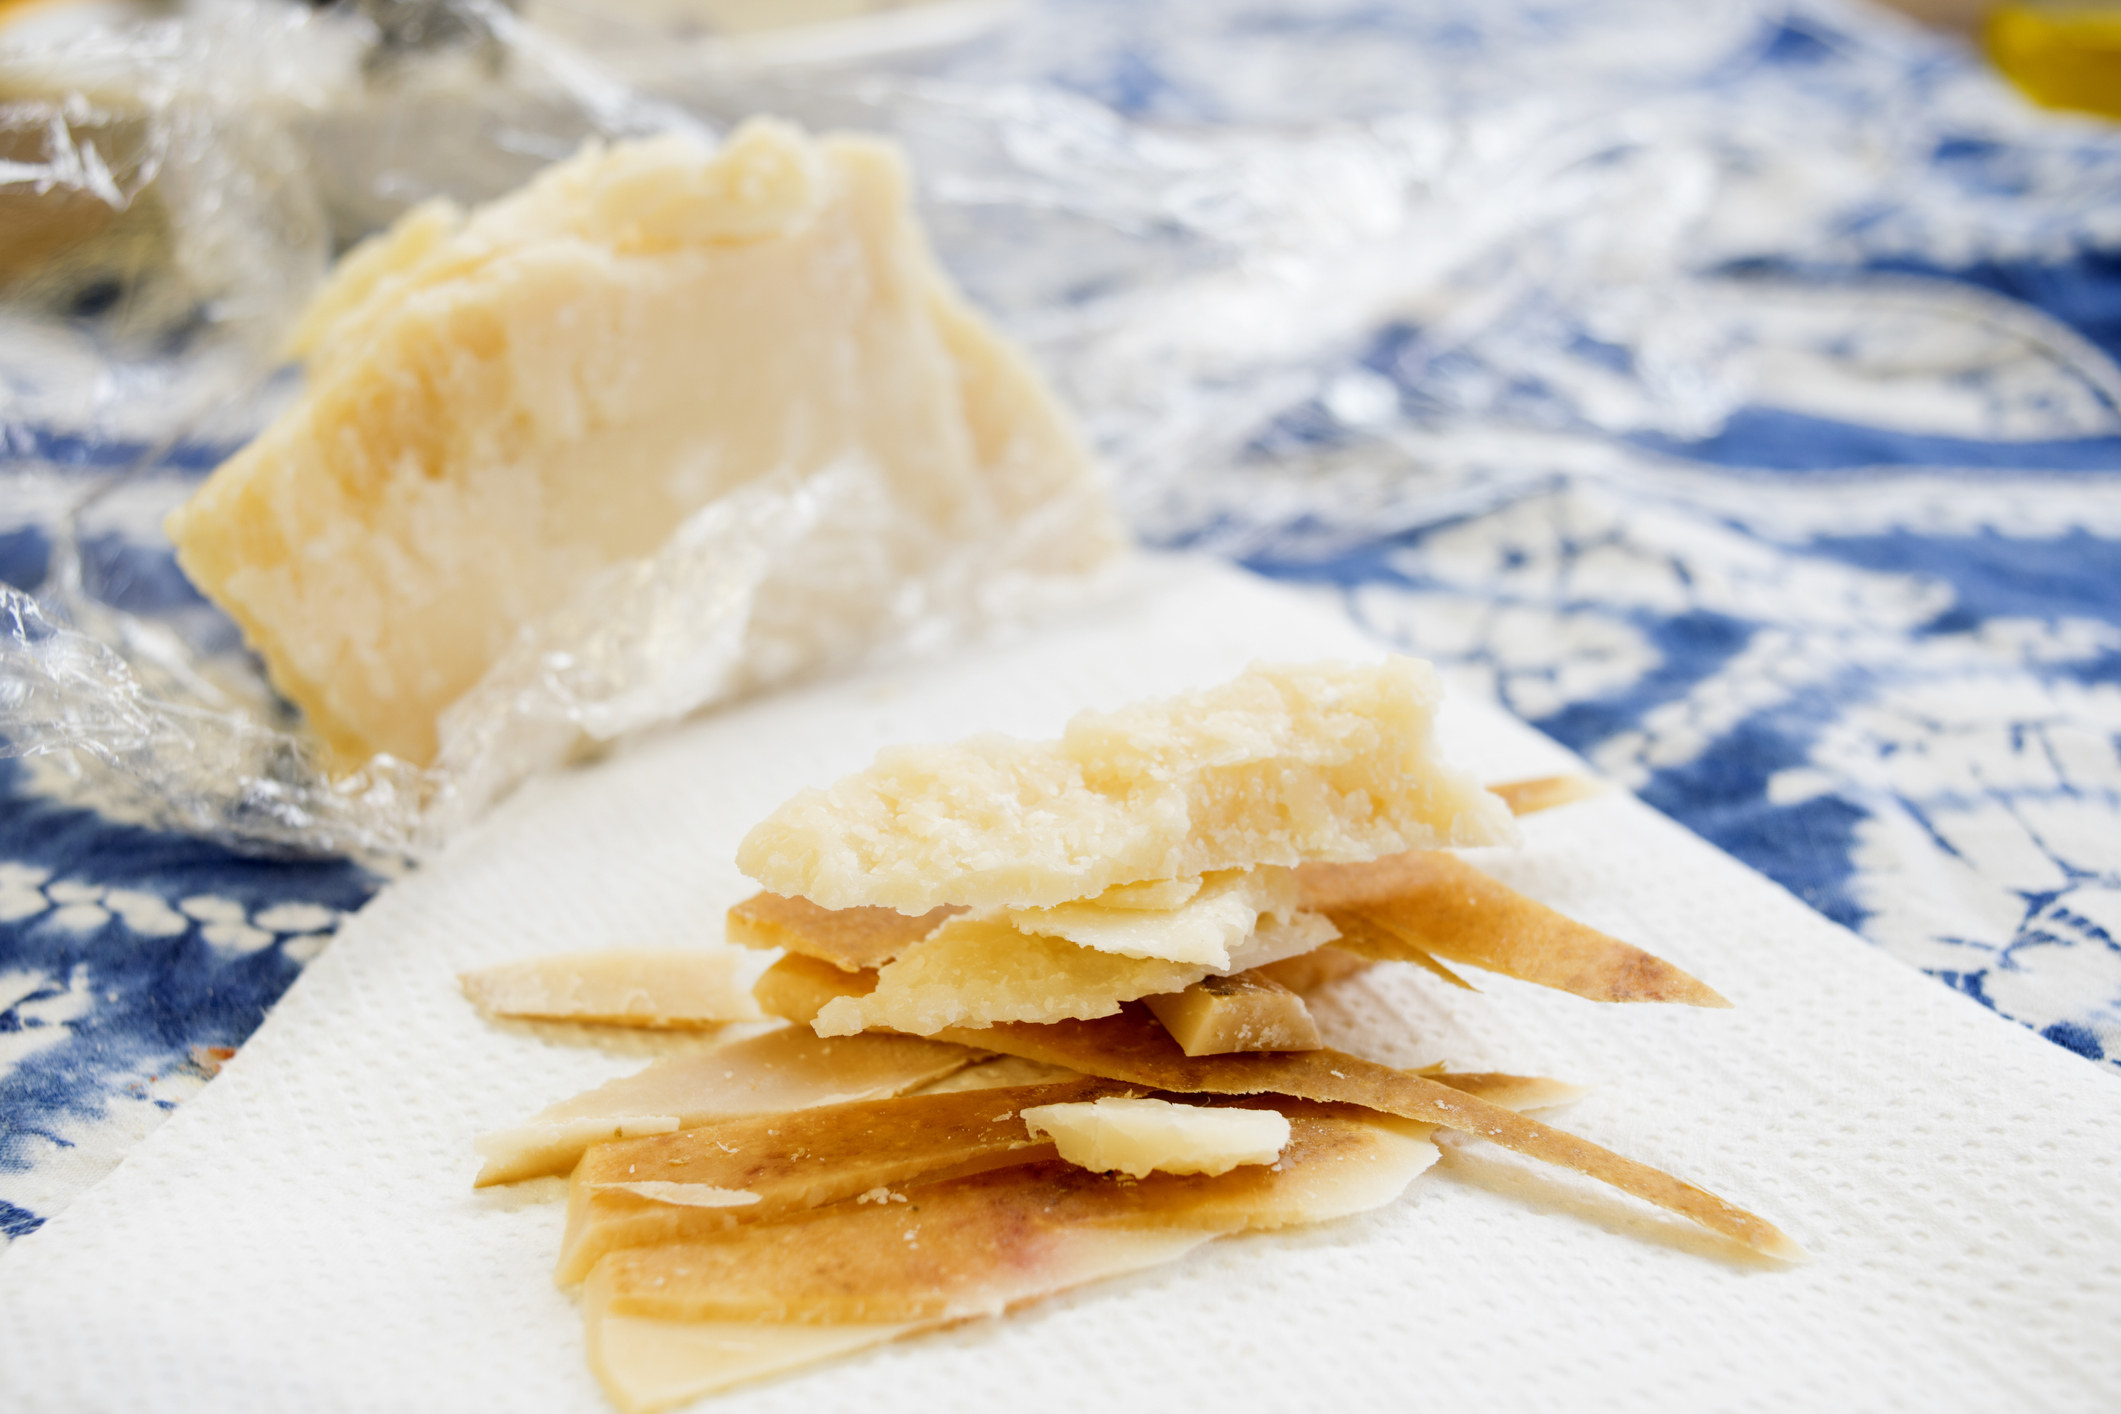 Parmesan cheese chunks and rind.